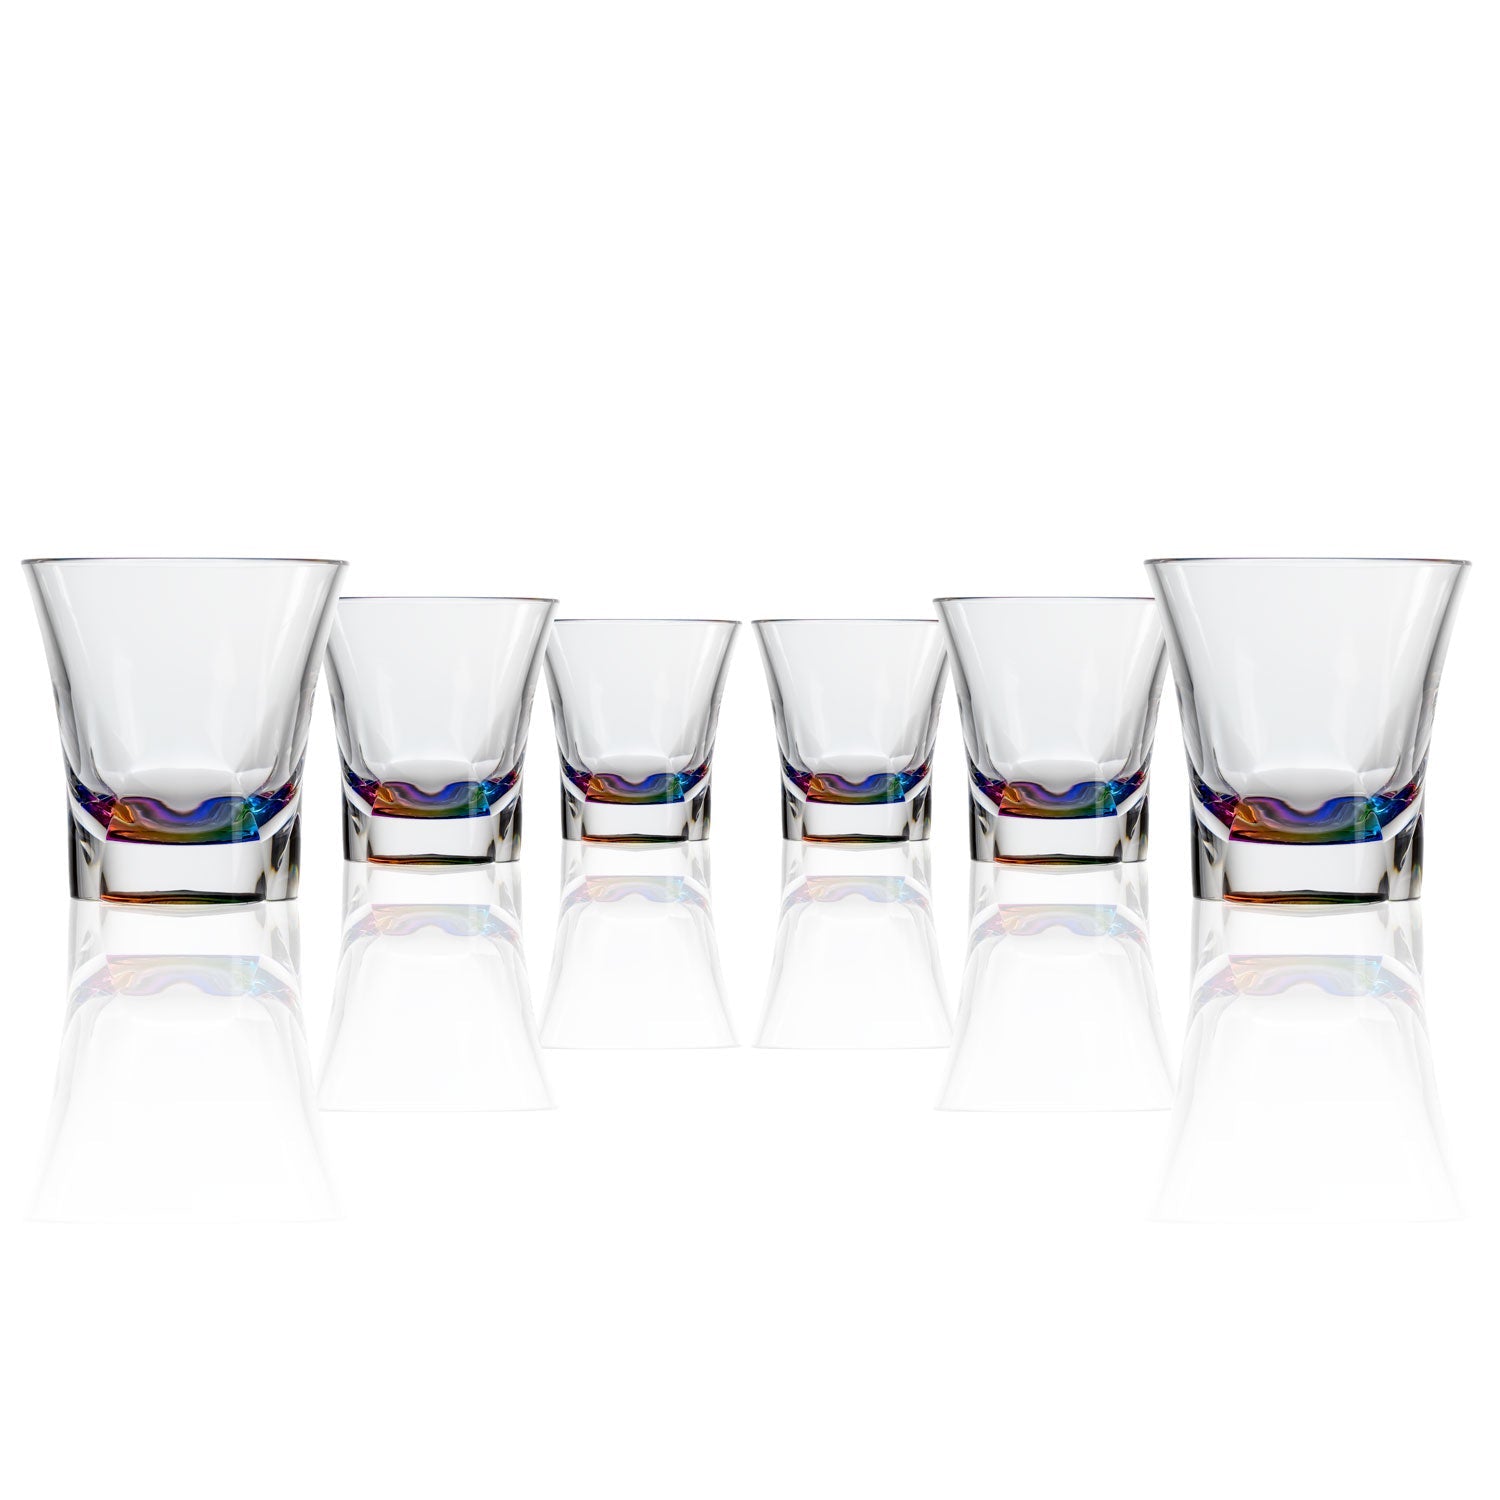 Set of 6, 10-ounce rainbow acrylic tumblers in the Fiori collection by Merritt Designs. Front view on white background